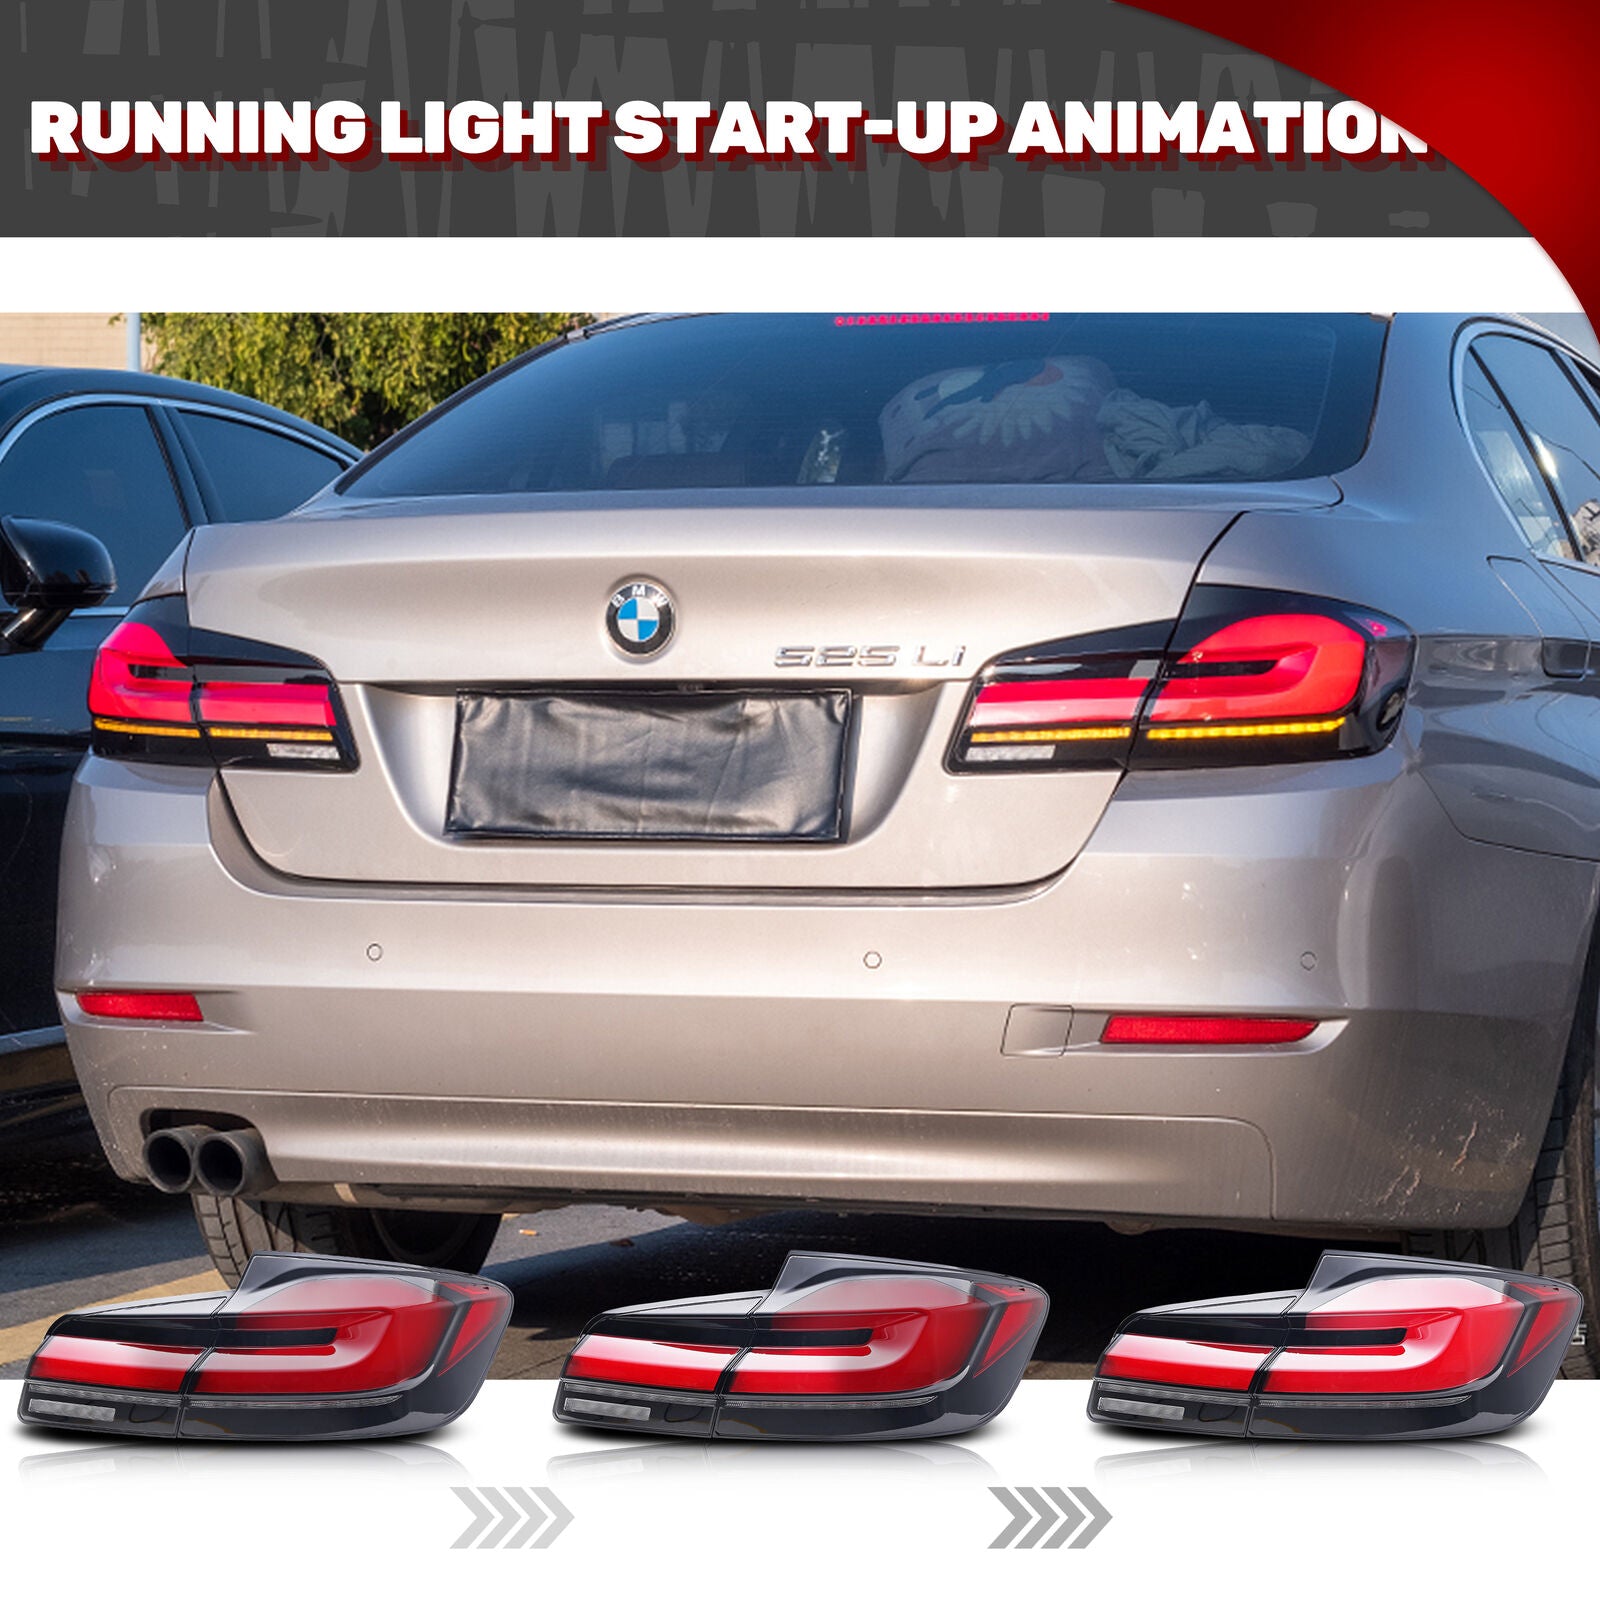 inginuity time LED G38 Tail Lights for BMW 5 Series F10 F18 M5 2011-20 –  Inginuity Time